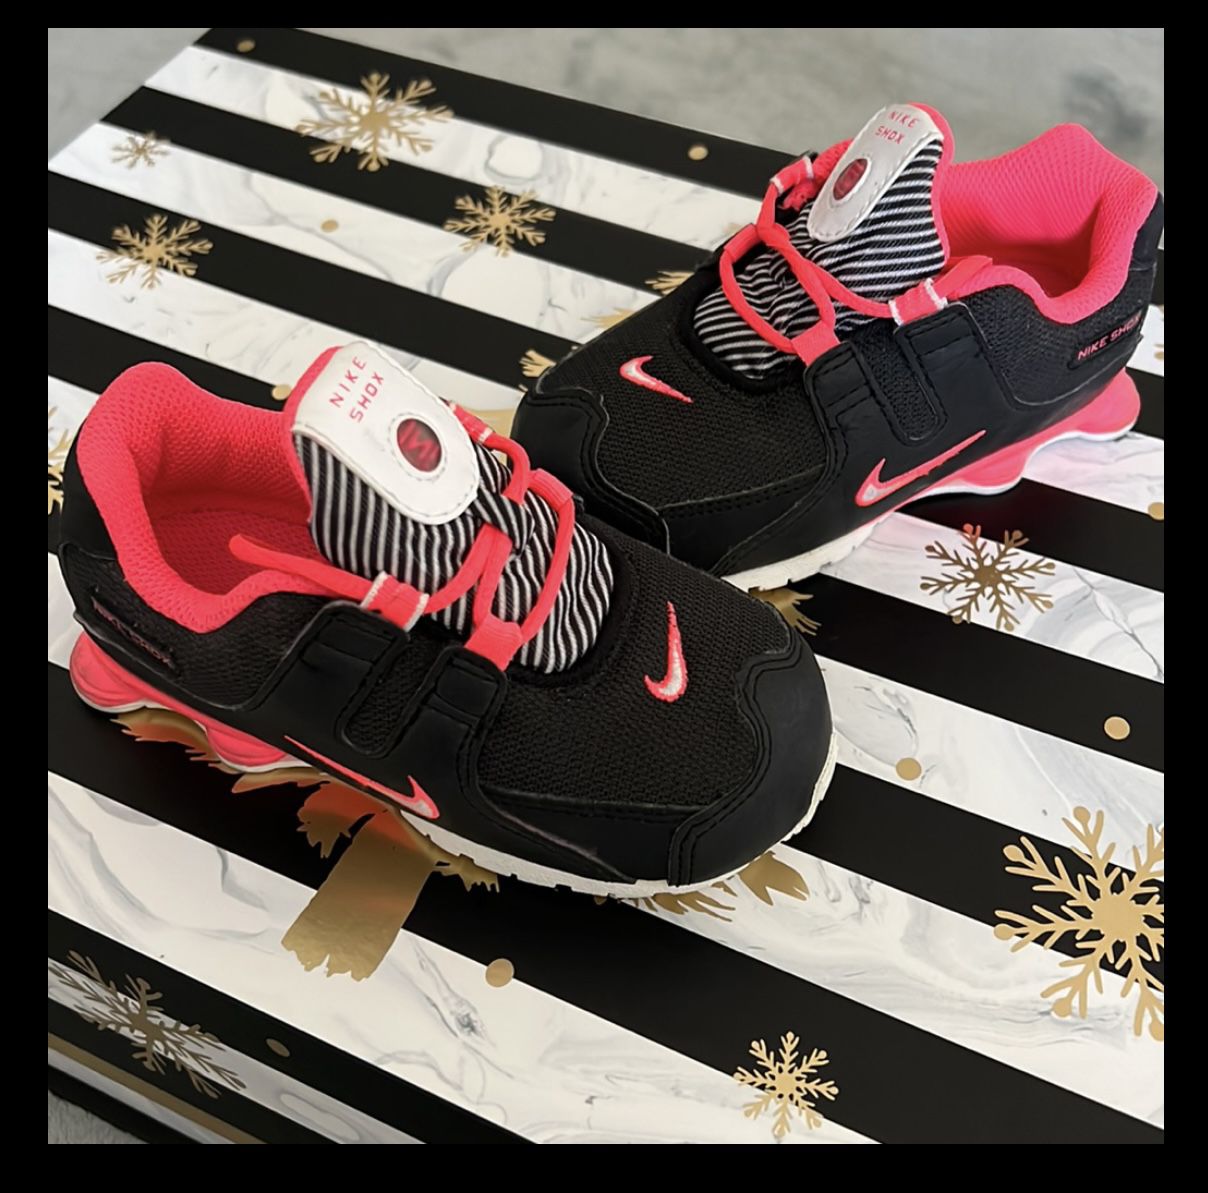 Girls' Nike Shox/ With Neon Pink for Sale Orange City, FL - OfferUp